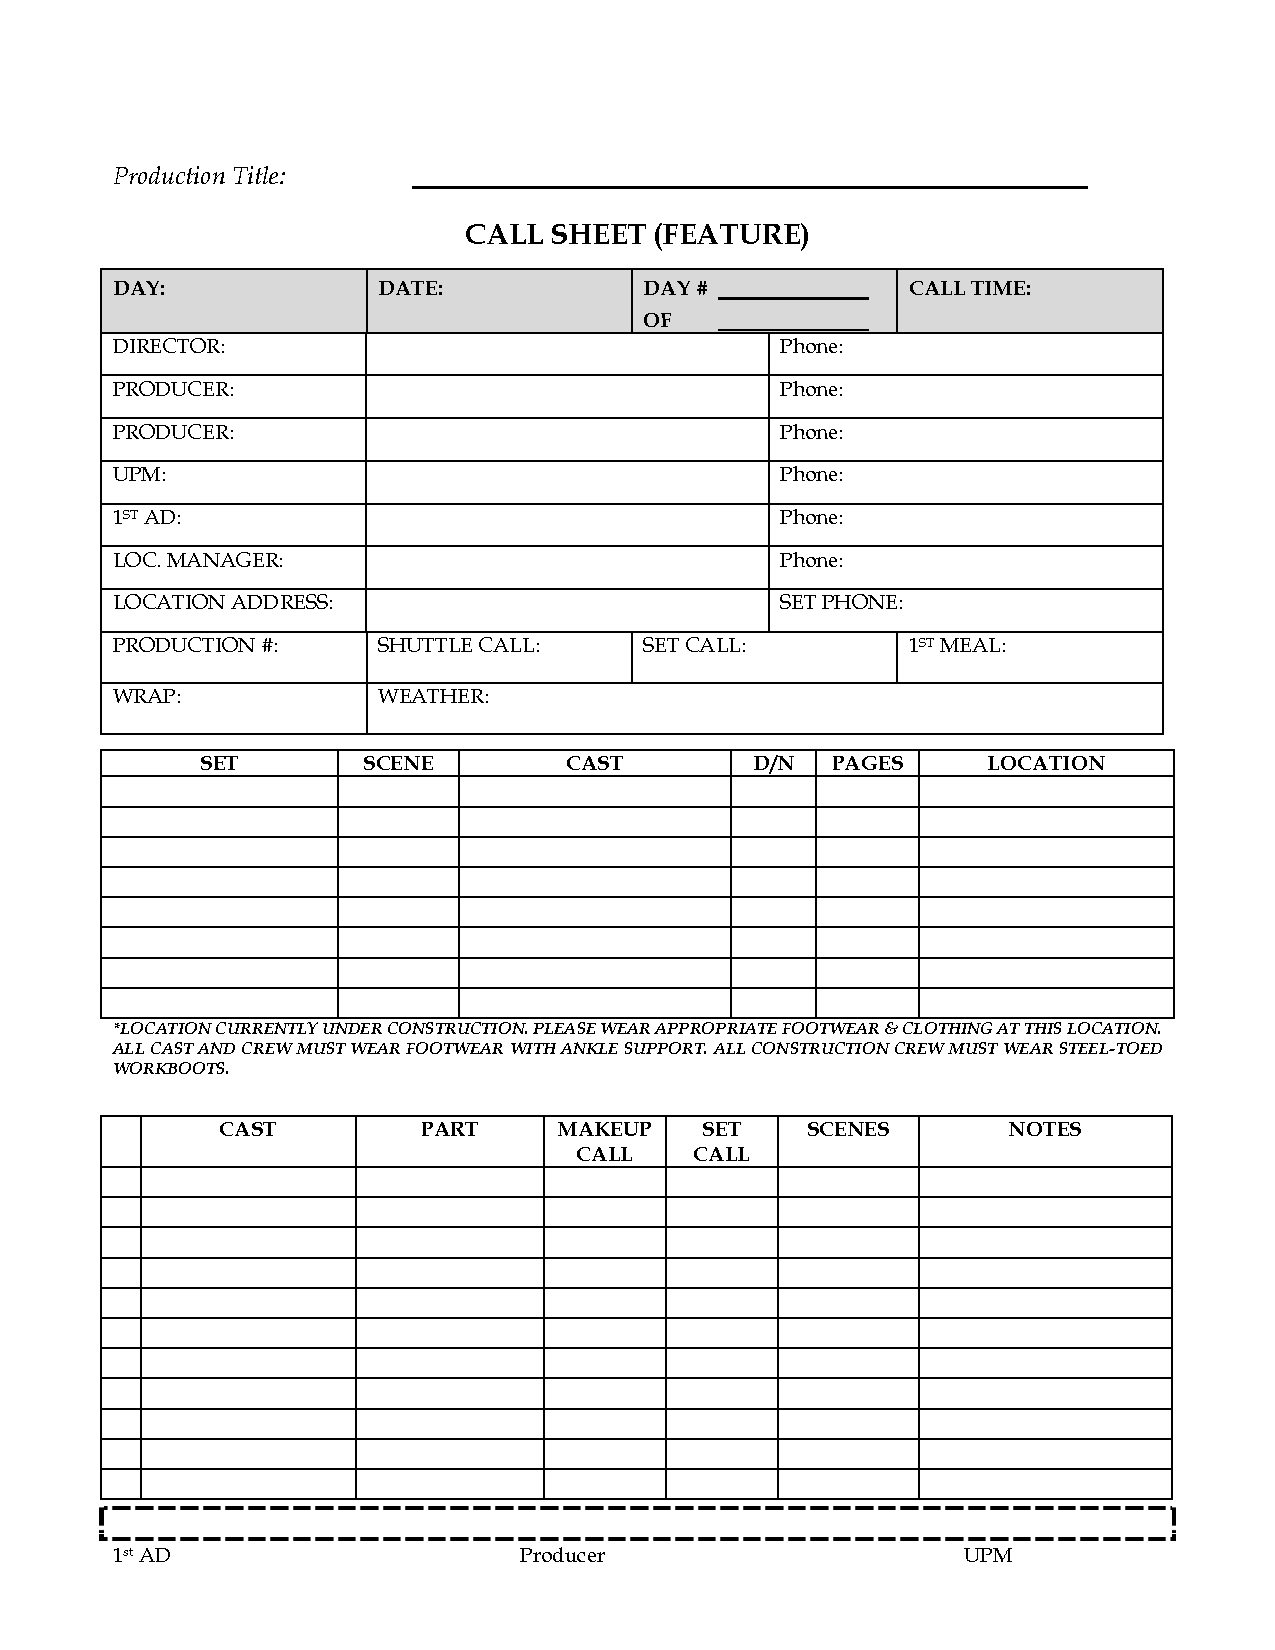 Awesome Call Sheet (Feature) Template Sample For Film With Regard To Blank Call Sheet Template